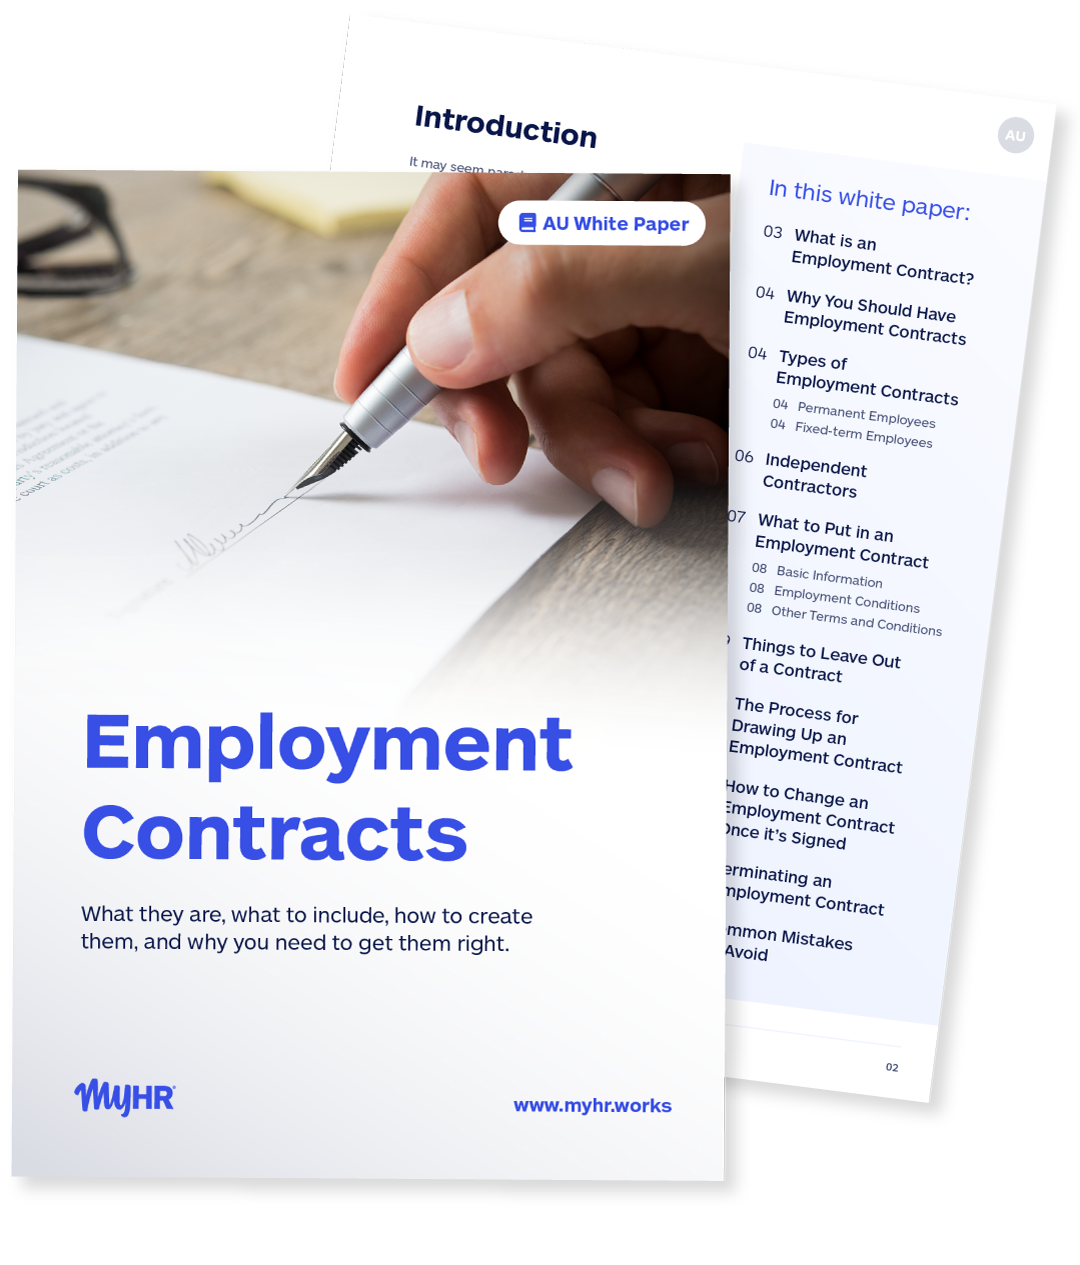 23-192_MyHR_Employment-Contracts-WP